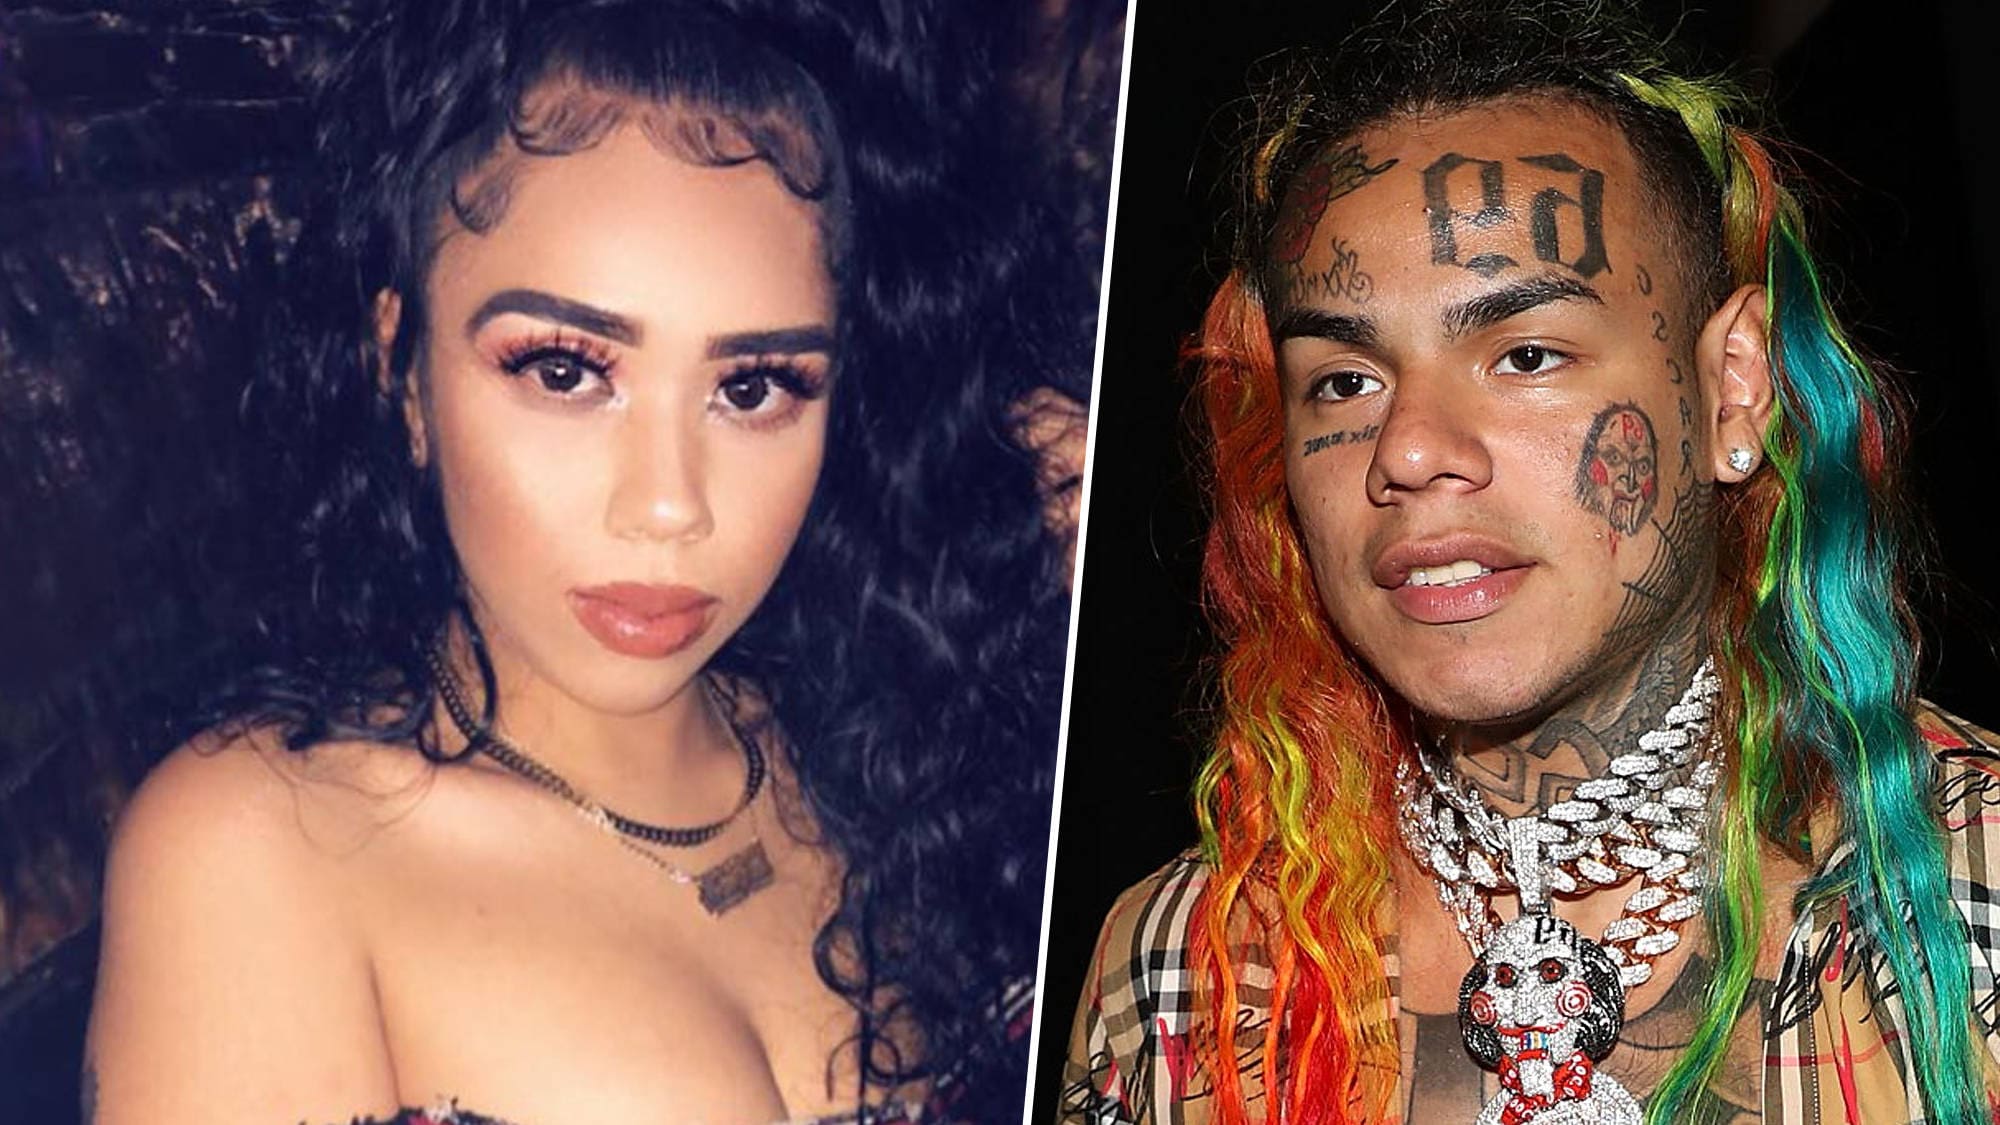 Tekashi 69's Baby Mama Sara Molina Says He's A Manipulative Narcissist And A 'Culture Vulture': 'He Can Adapt To Anything' - Watch The Video